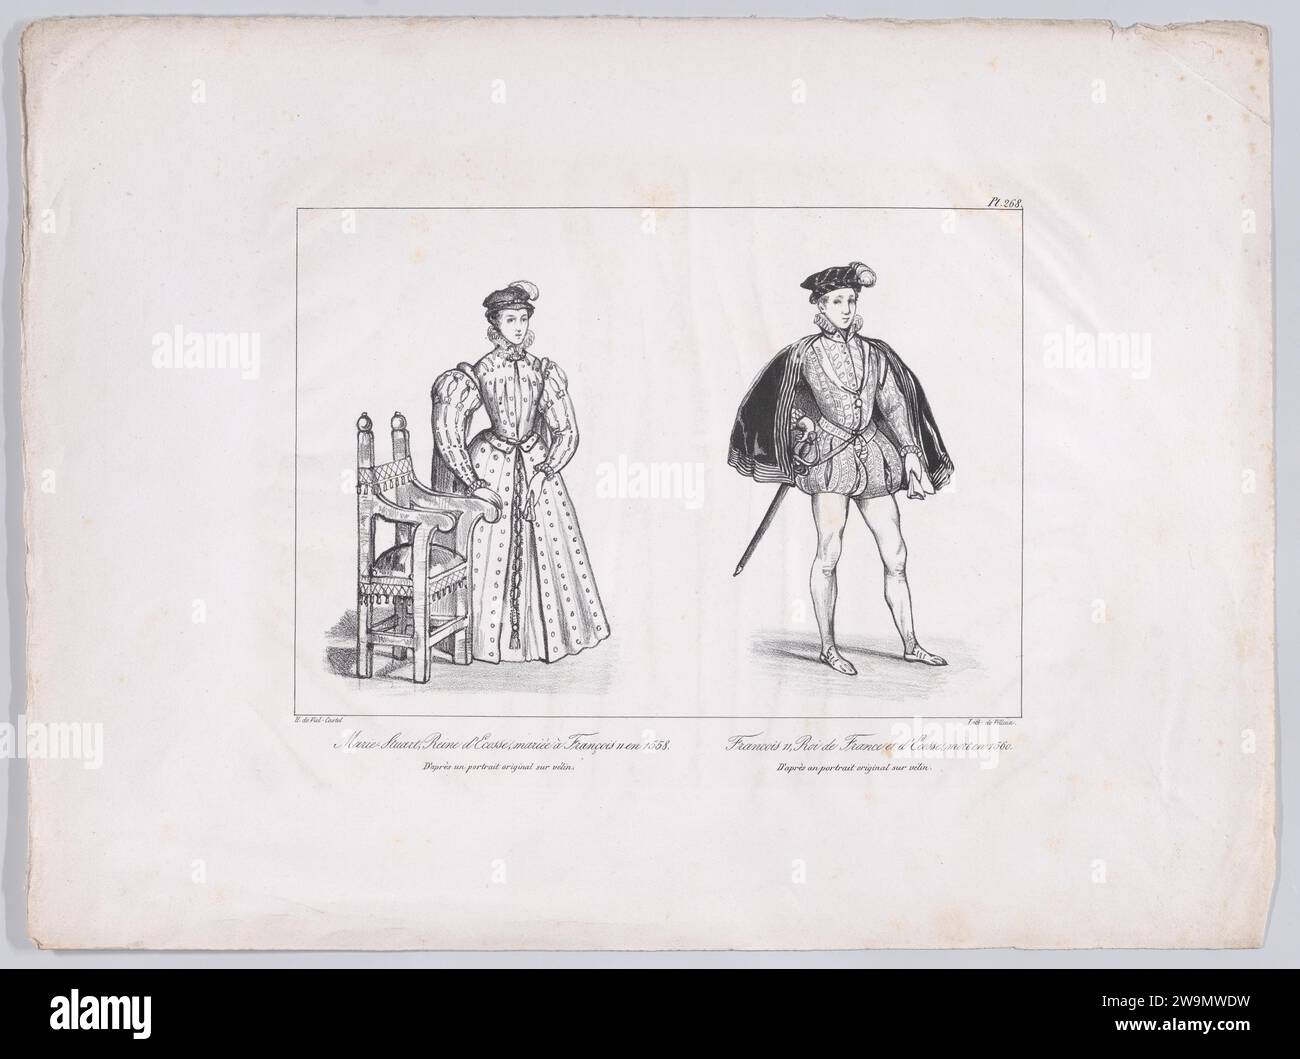 Mary, Queen of Scots and Francis II, King of France (from 'Collection des costumes, armes et meubles pour servir a l'histoire de France depuis le commencement du Veme siecle jusqu'a nos jours,' plate 268) 1958 by Mary, Queen of Scots Stock Photo